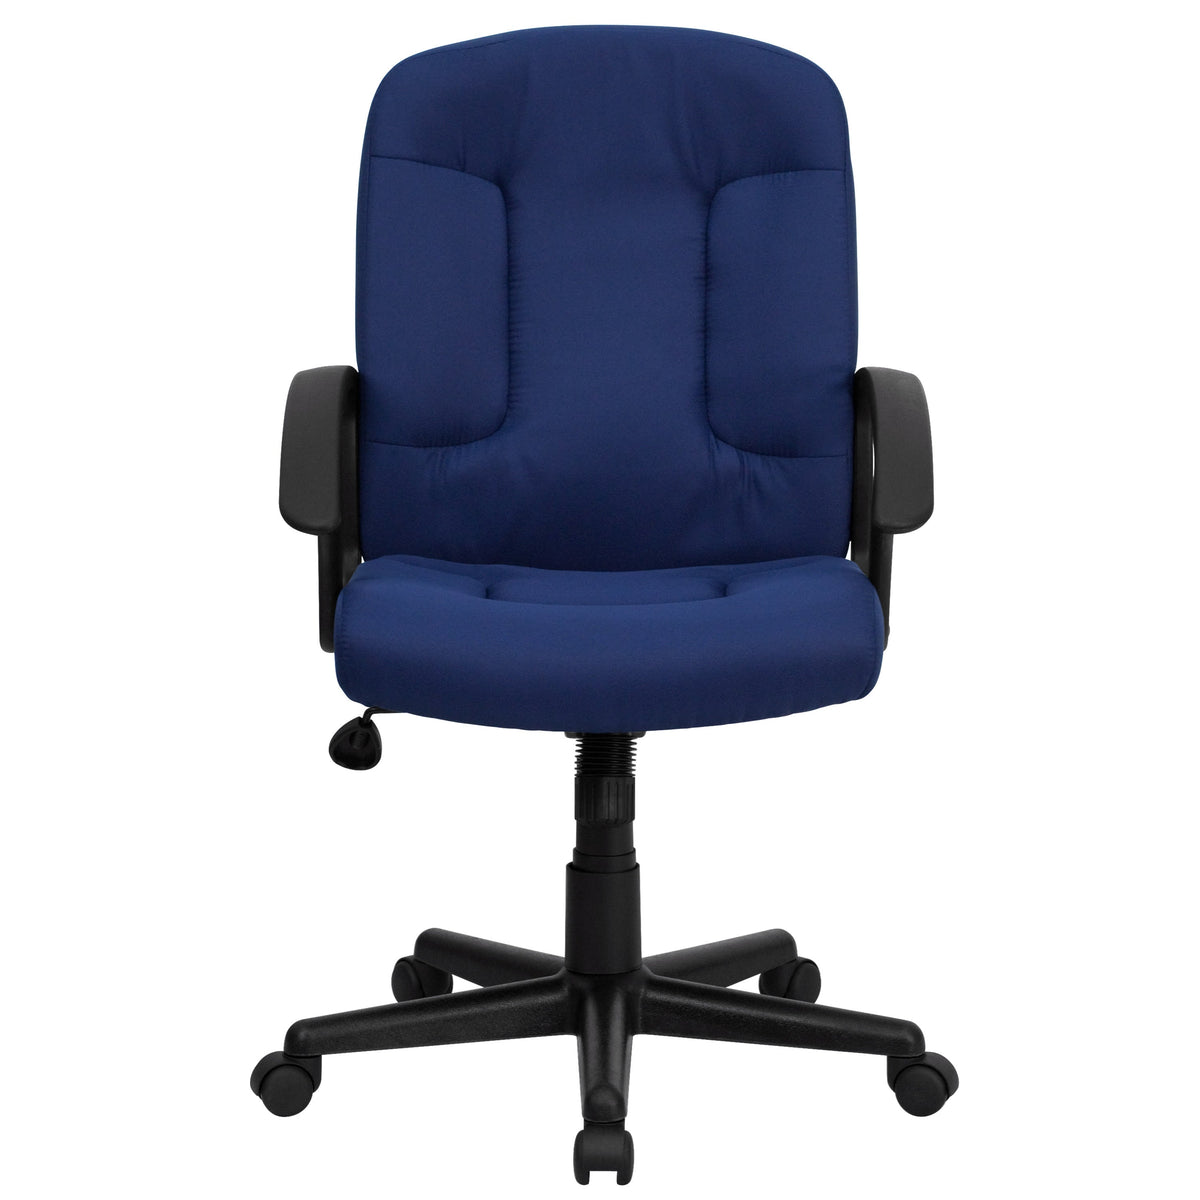 Navy |#| Mid-Back Navy Fabric Executive Swivel Office Chair with Nylon Arms